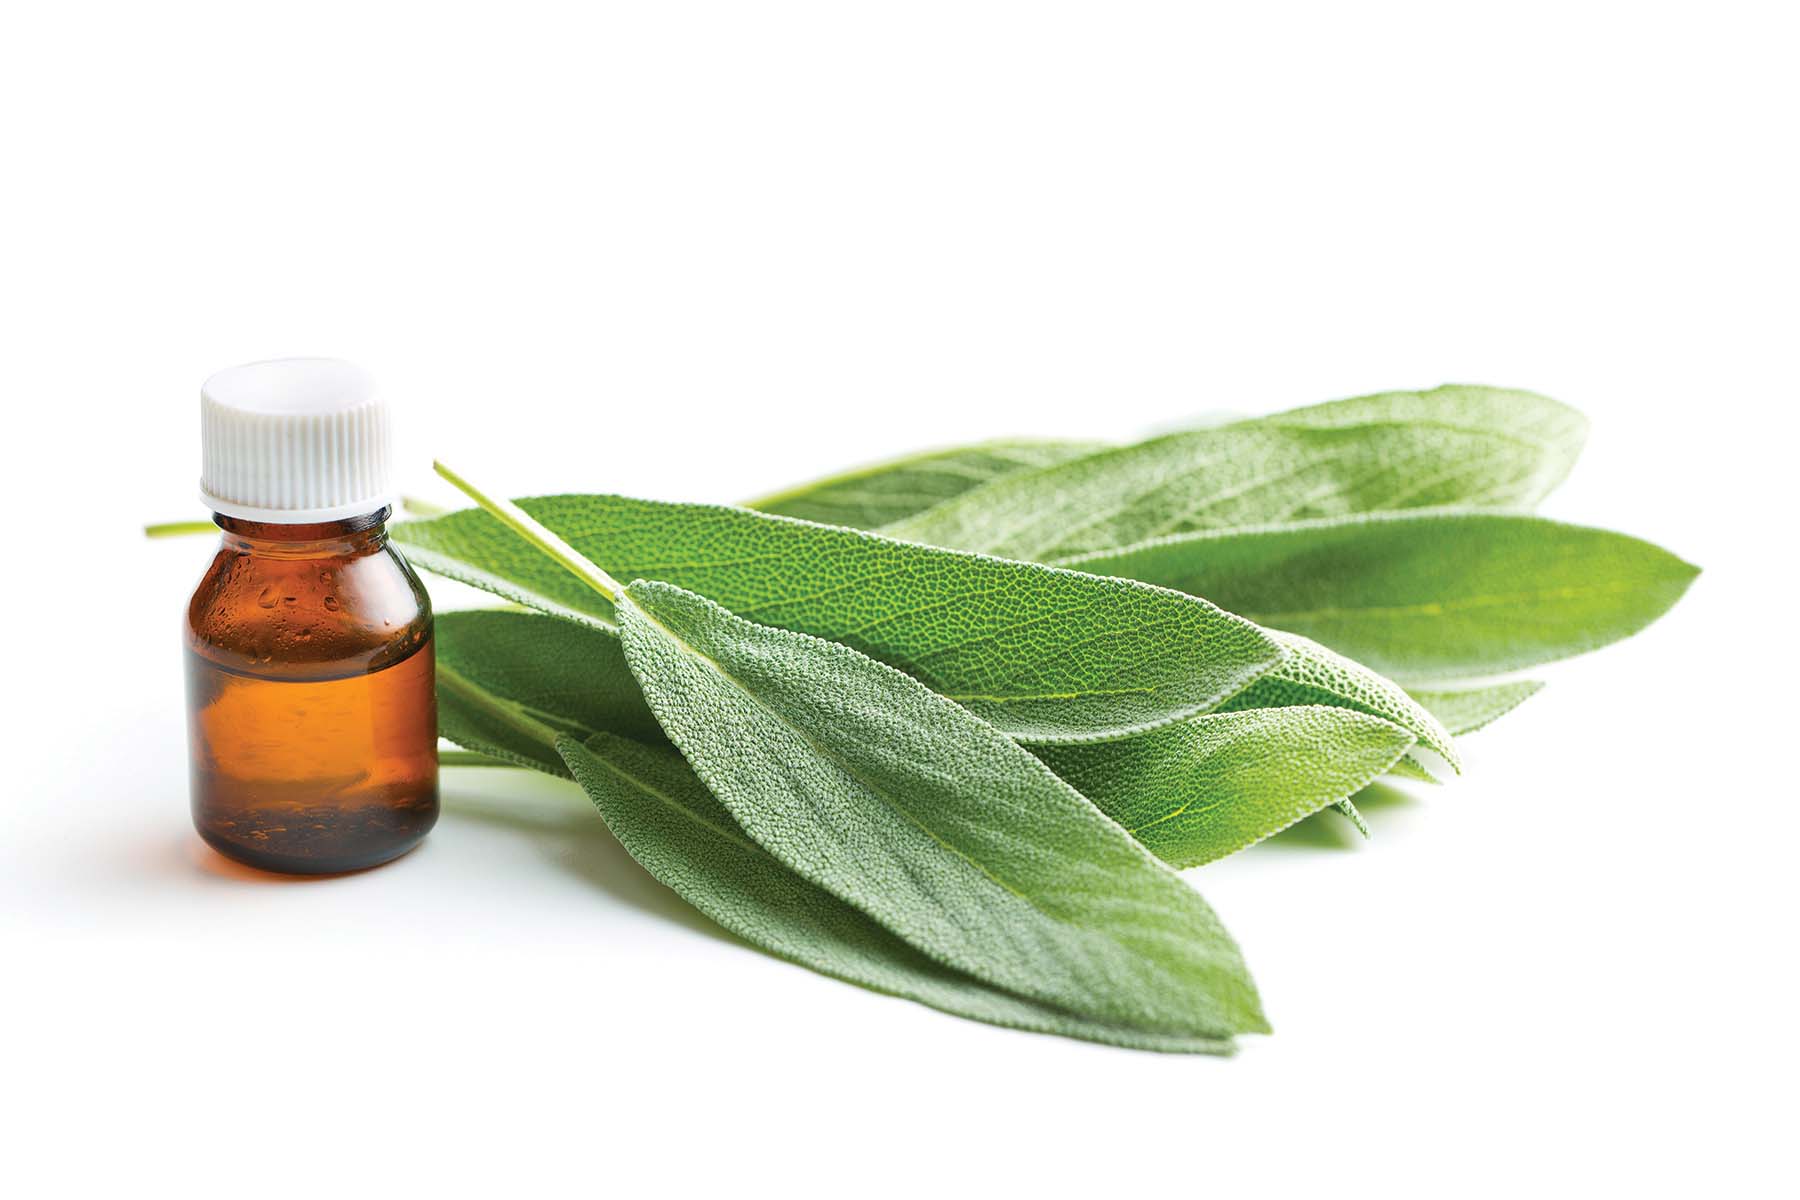 Bottle of essential oil and sage leaves